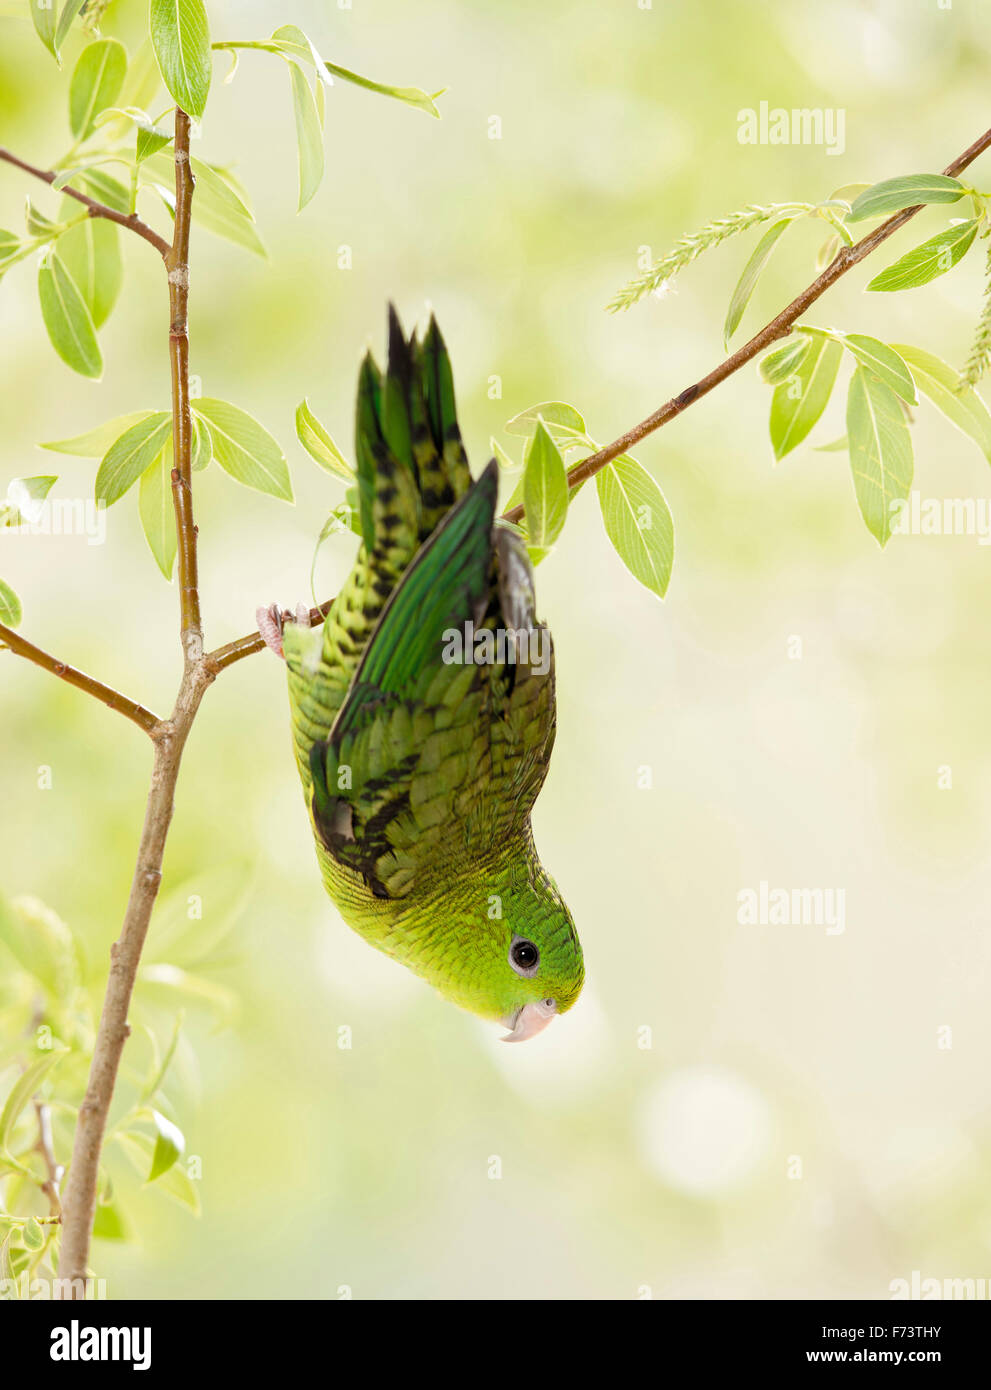 Barred Parakeet, Catharine Parakeet (Bolborhynchus lineola) . Juvenile green bird hanging head first from a Willow twig. Stock Photo